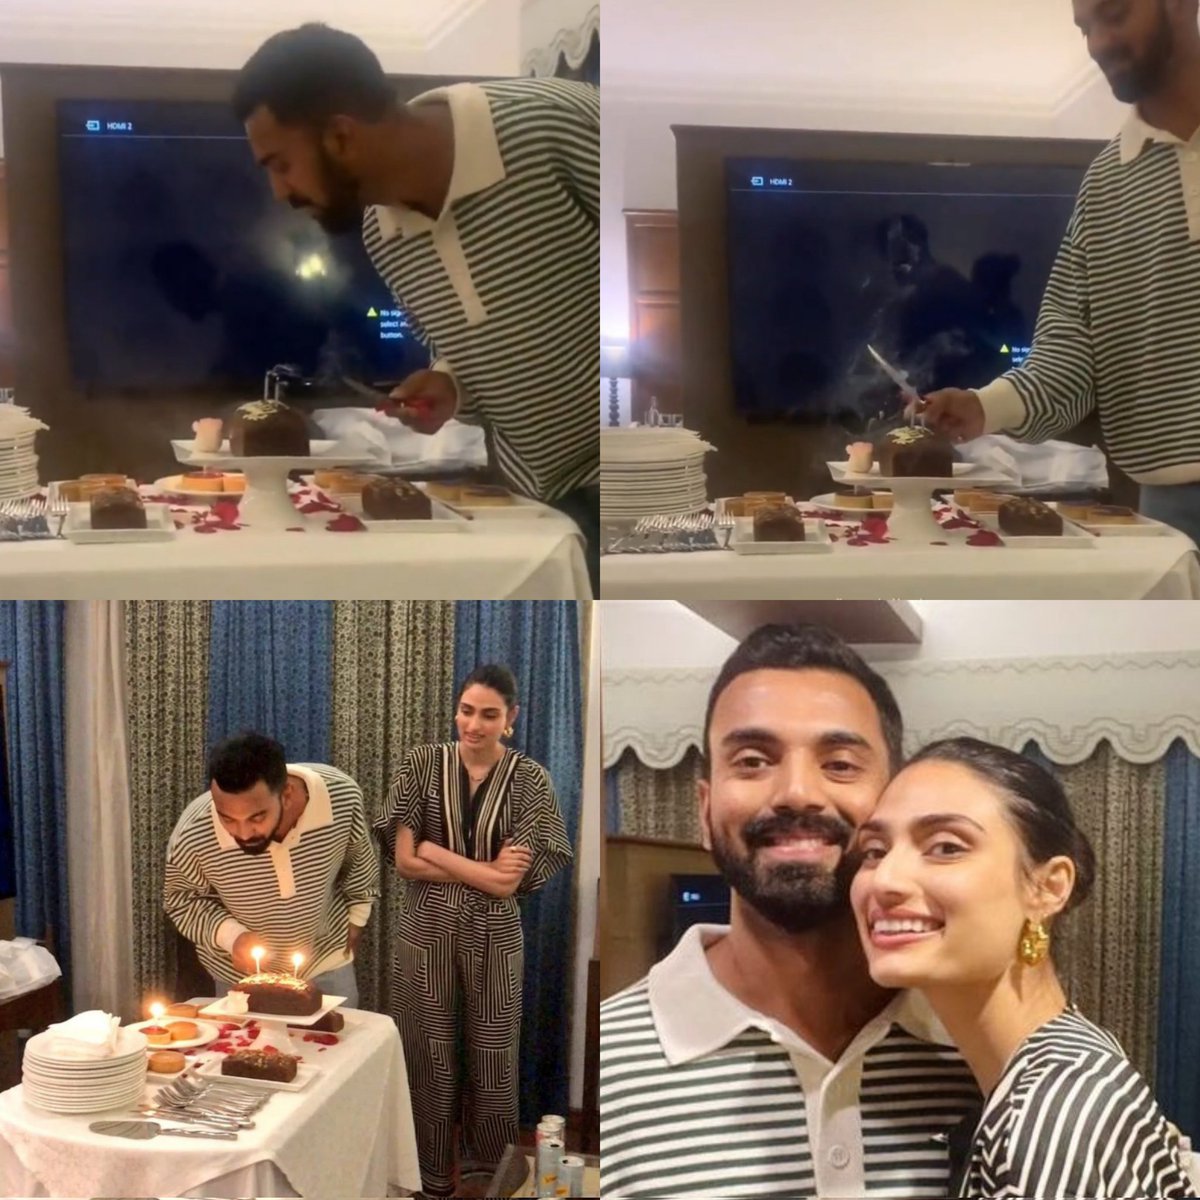 Pictures from bossman KL Rahul's 31st birthday celebration with his wife, last night ❤️
#HappyBirthdayKLRahul